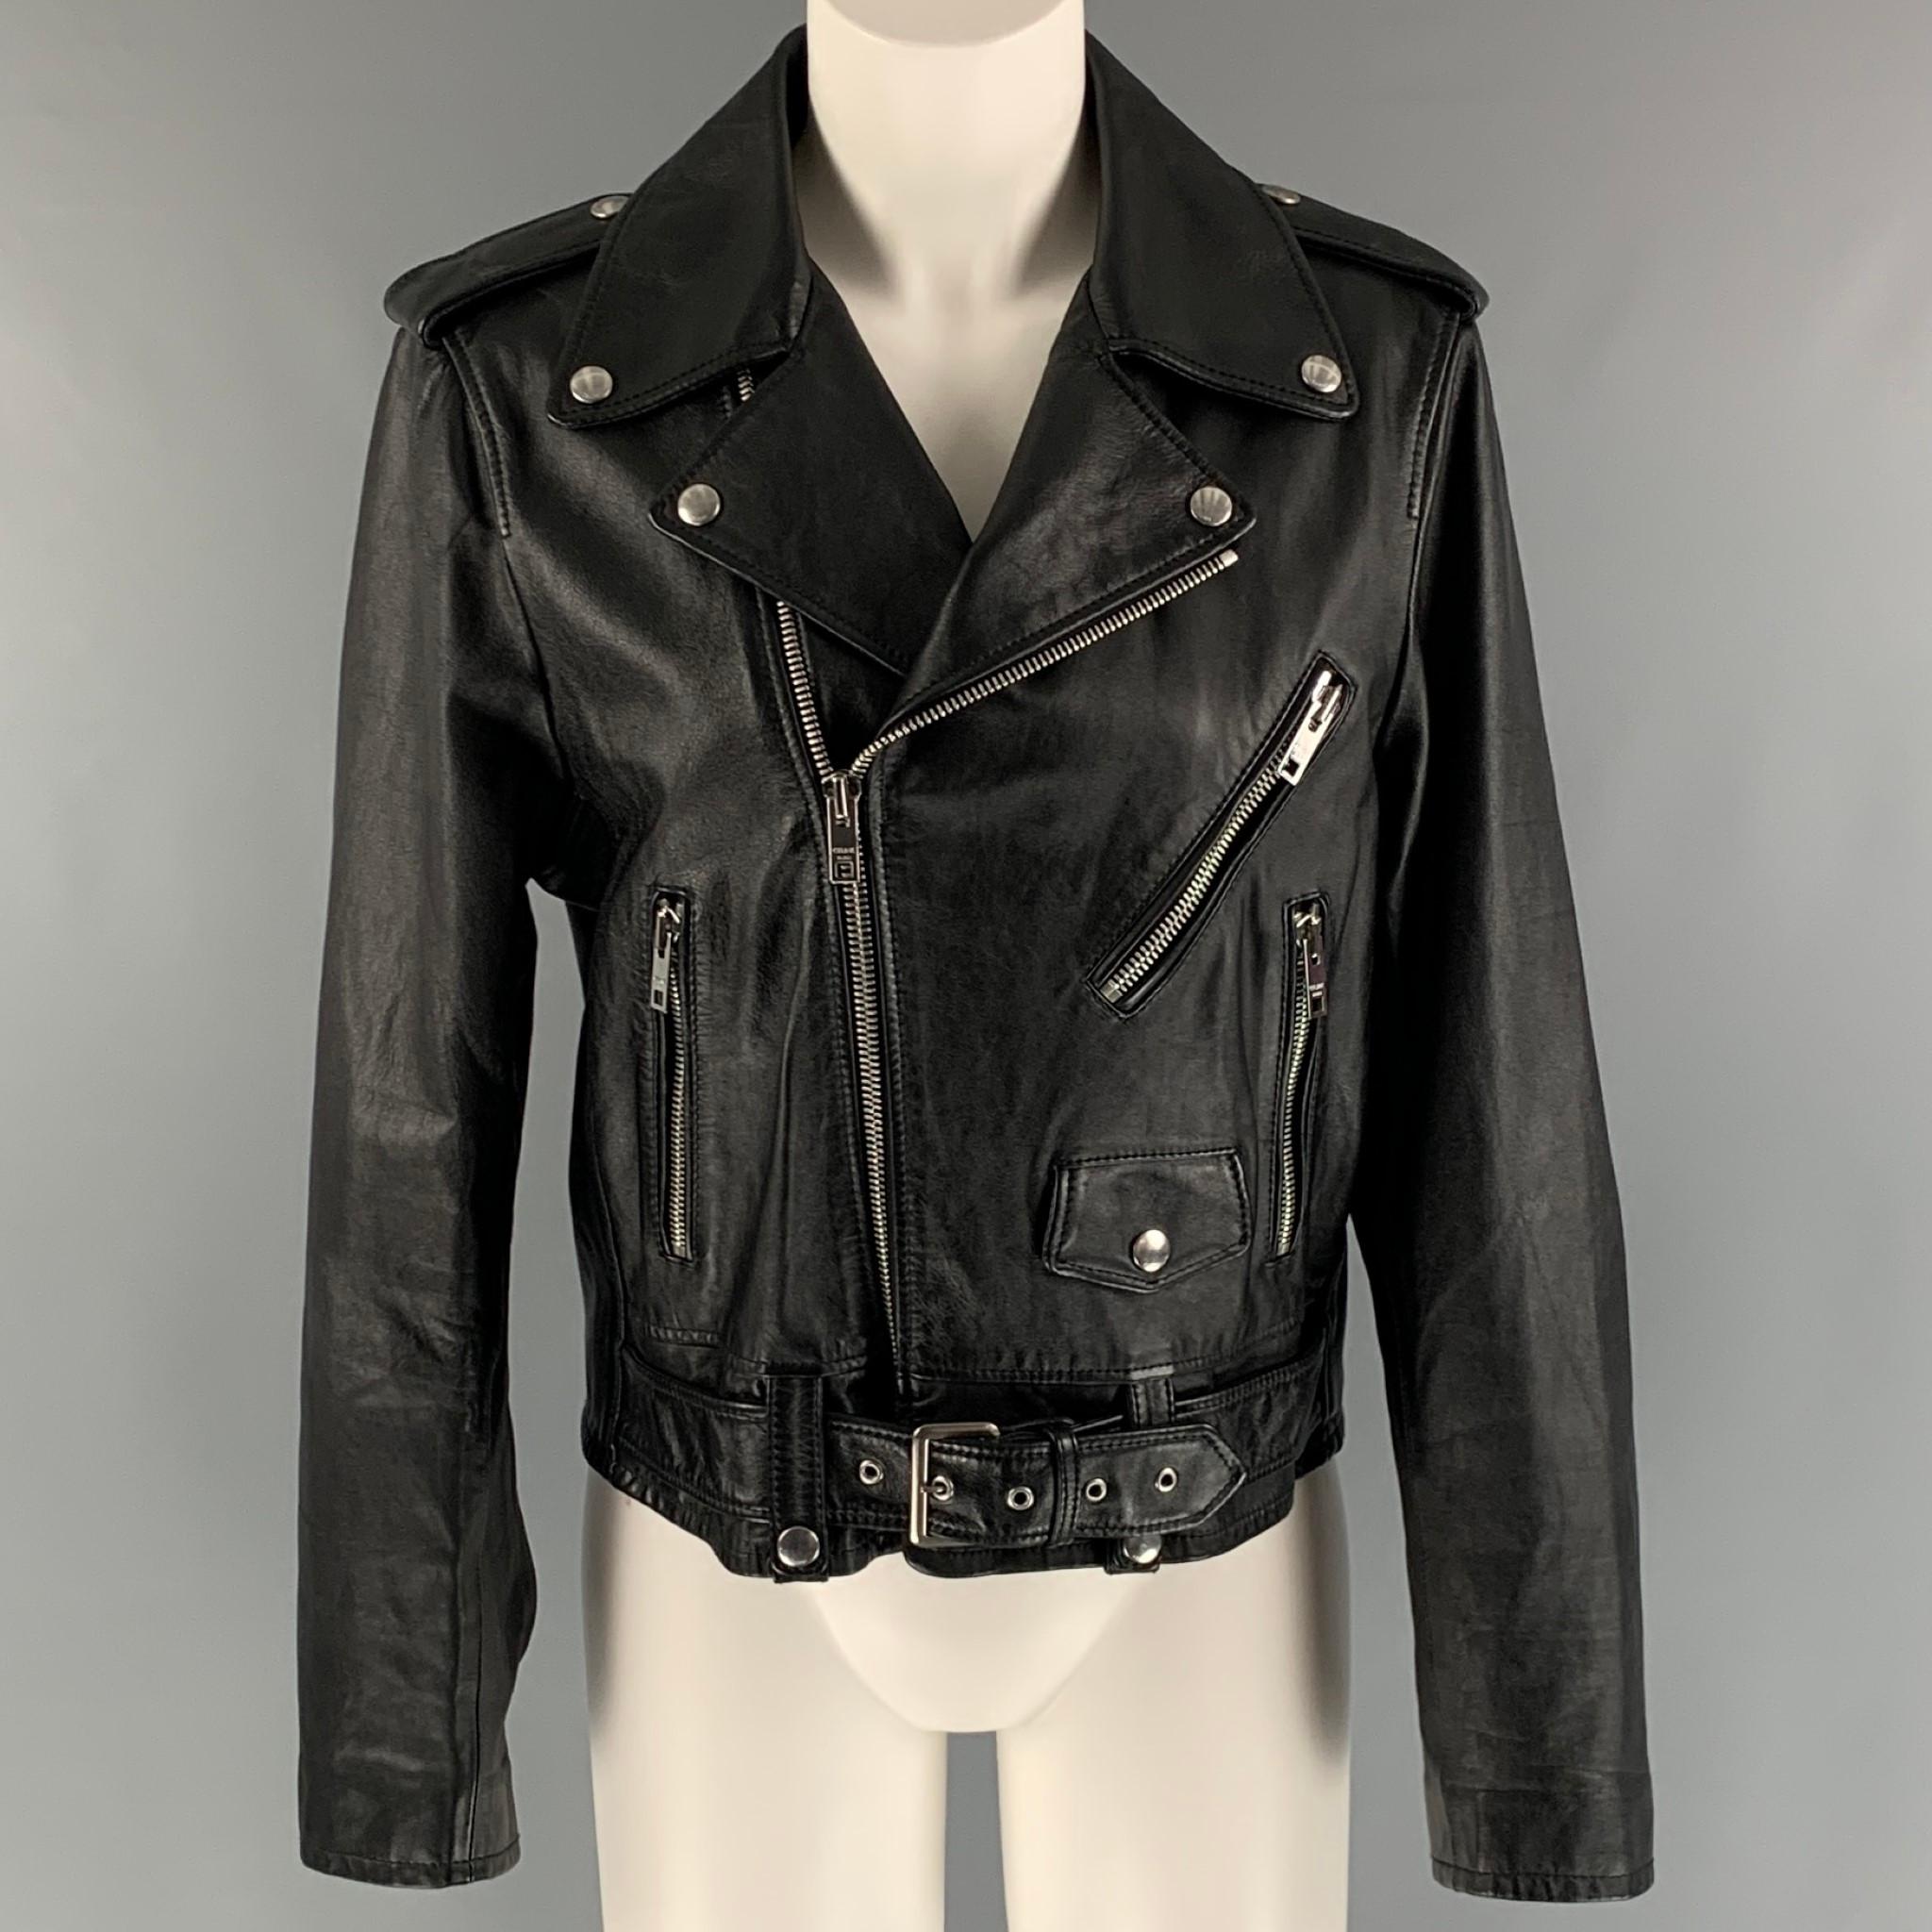 CELINE jacket comes in a black leather featuring a motorcycle style, silver tone hardware, waist belt, epaulettes, and a zip up closure. Made in Italy.

New with tags.
Marked: 44

Measurements:

Shoulder: 17.5 in.
Bust: 41 in.
Sleeve: 24 in.
Length: